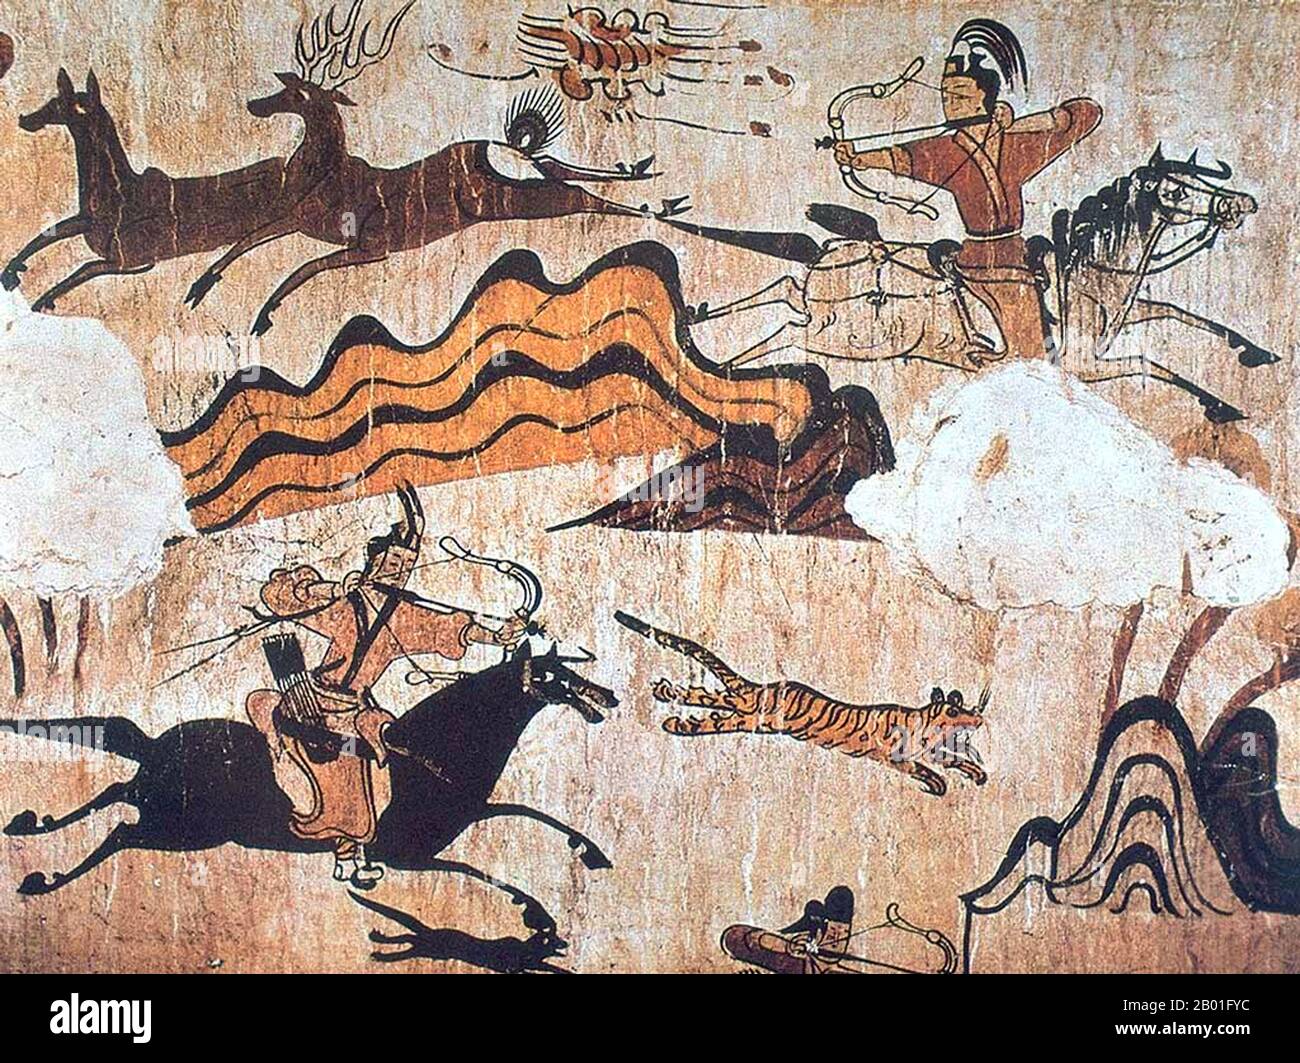 Korea/China: Hunting Scene, Tomb of the Dancers, from Koguryo, West Wall of the Burial Chamber, Tomb of the Dancers, Jilin Province, c. 5th century CE.  Goguryeo or Koguryŏ was an ancient Korean kingdom located in present day northern and central parts of the Korean Peninsula, southern Manchuria and southern Russian Maritime province.  Along with Baekje and Silla, Goguryeo was one of the Three Kingdoms of Korea. Goguryeo was an active participant in the power struggle for control of the Korean peninsula as well as associated with the foreign affairs of neighboring polities in China and Japan. Stock Photo